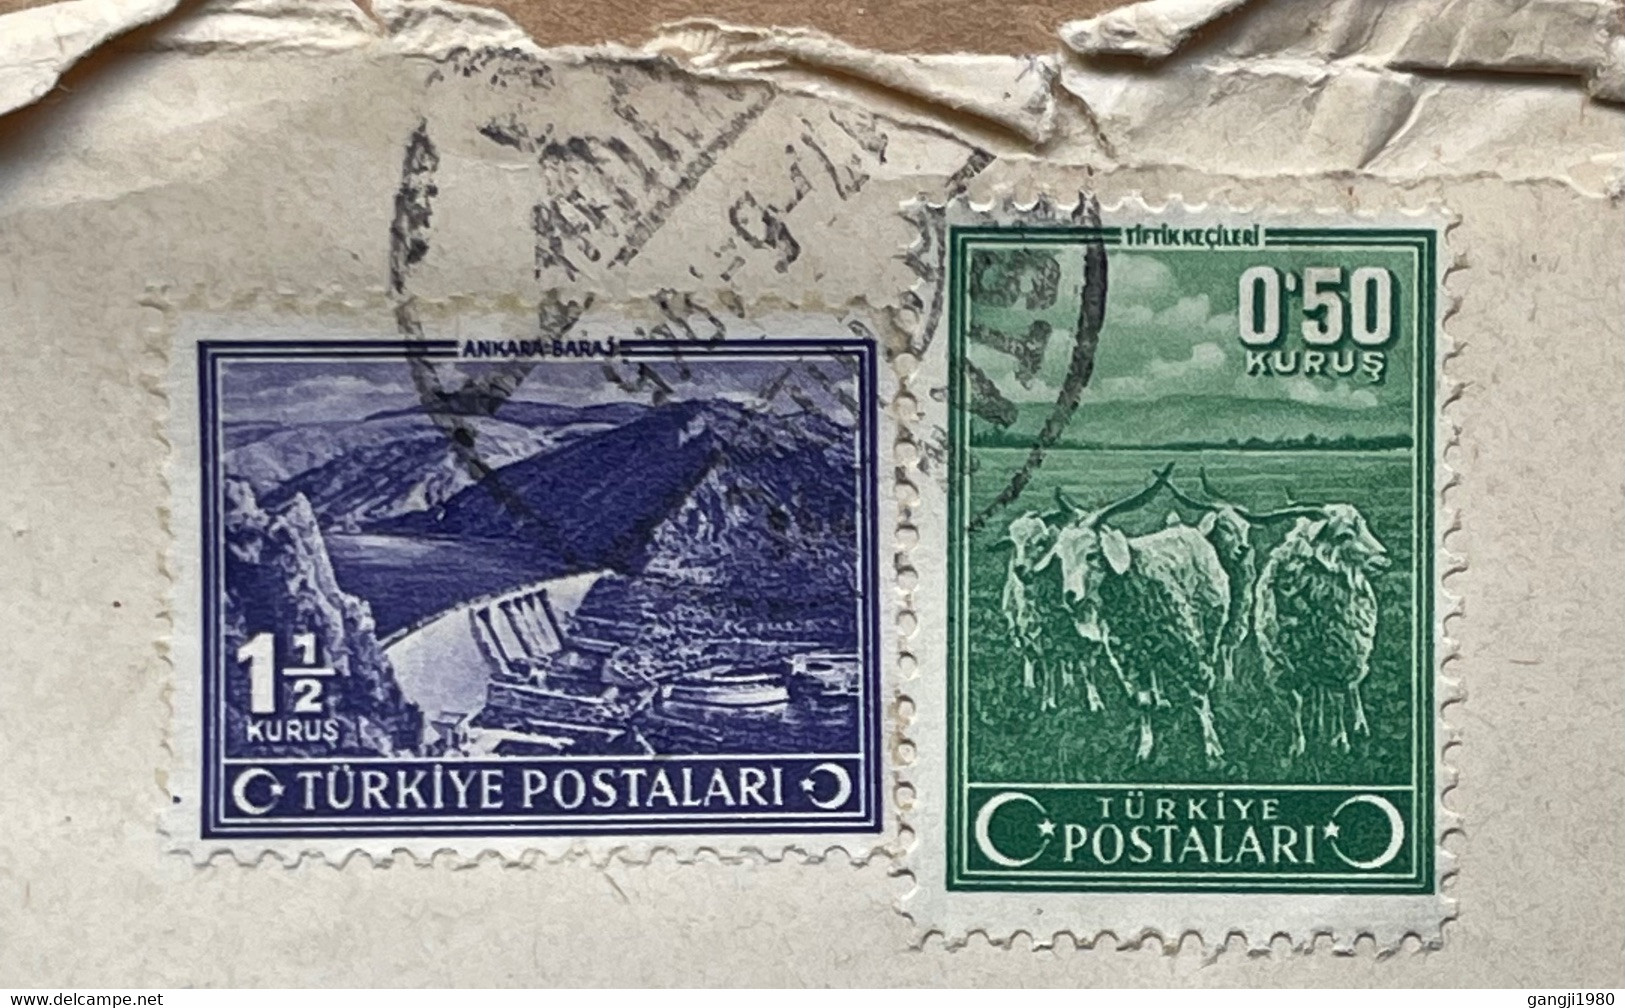 TURKEY-1945, COVER USED TO USA, JOHN CAOUKI & CO.FIRM, 1943 STAMP MOHAIR GOATS, ANKARA RESERVOIR, WATER SUPPLY, ISTANBUL - Briefe U. Dokumente